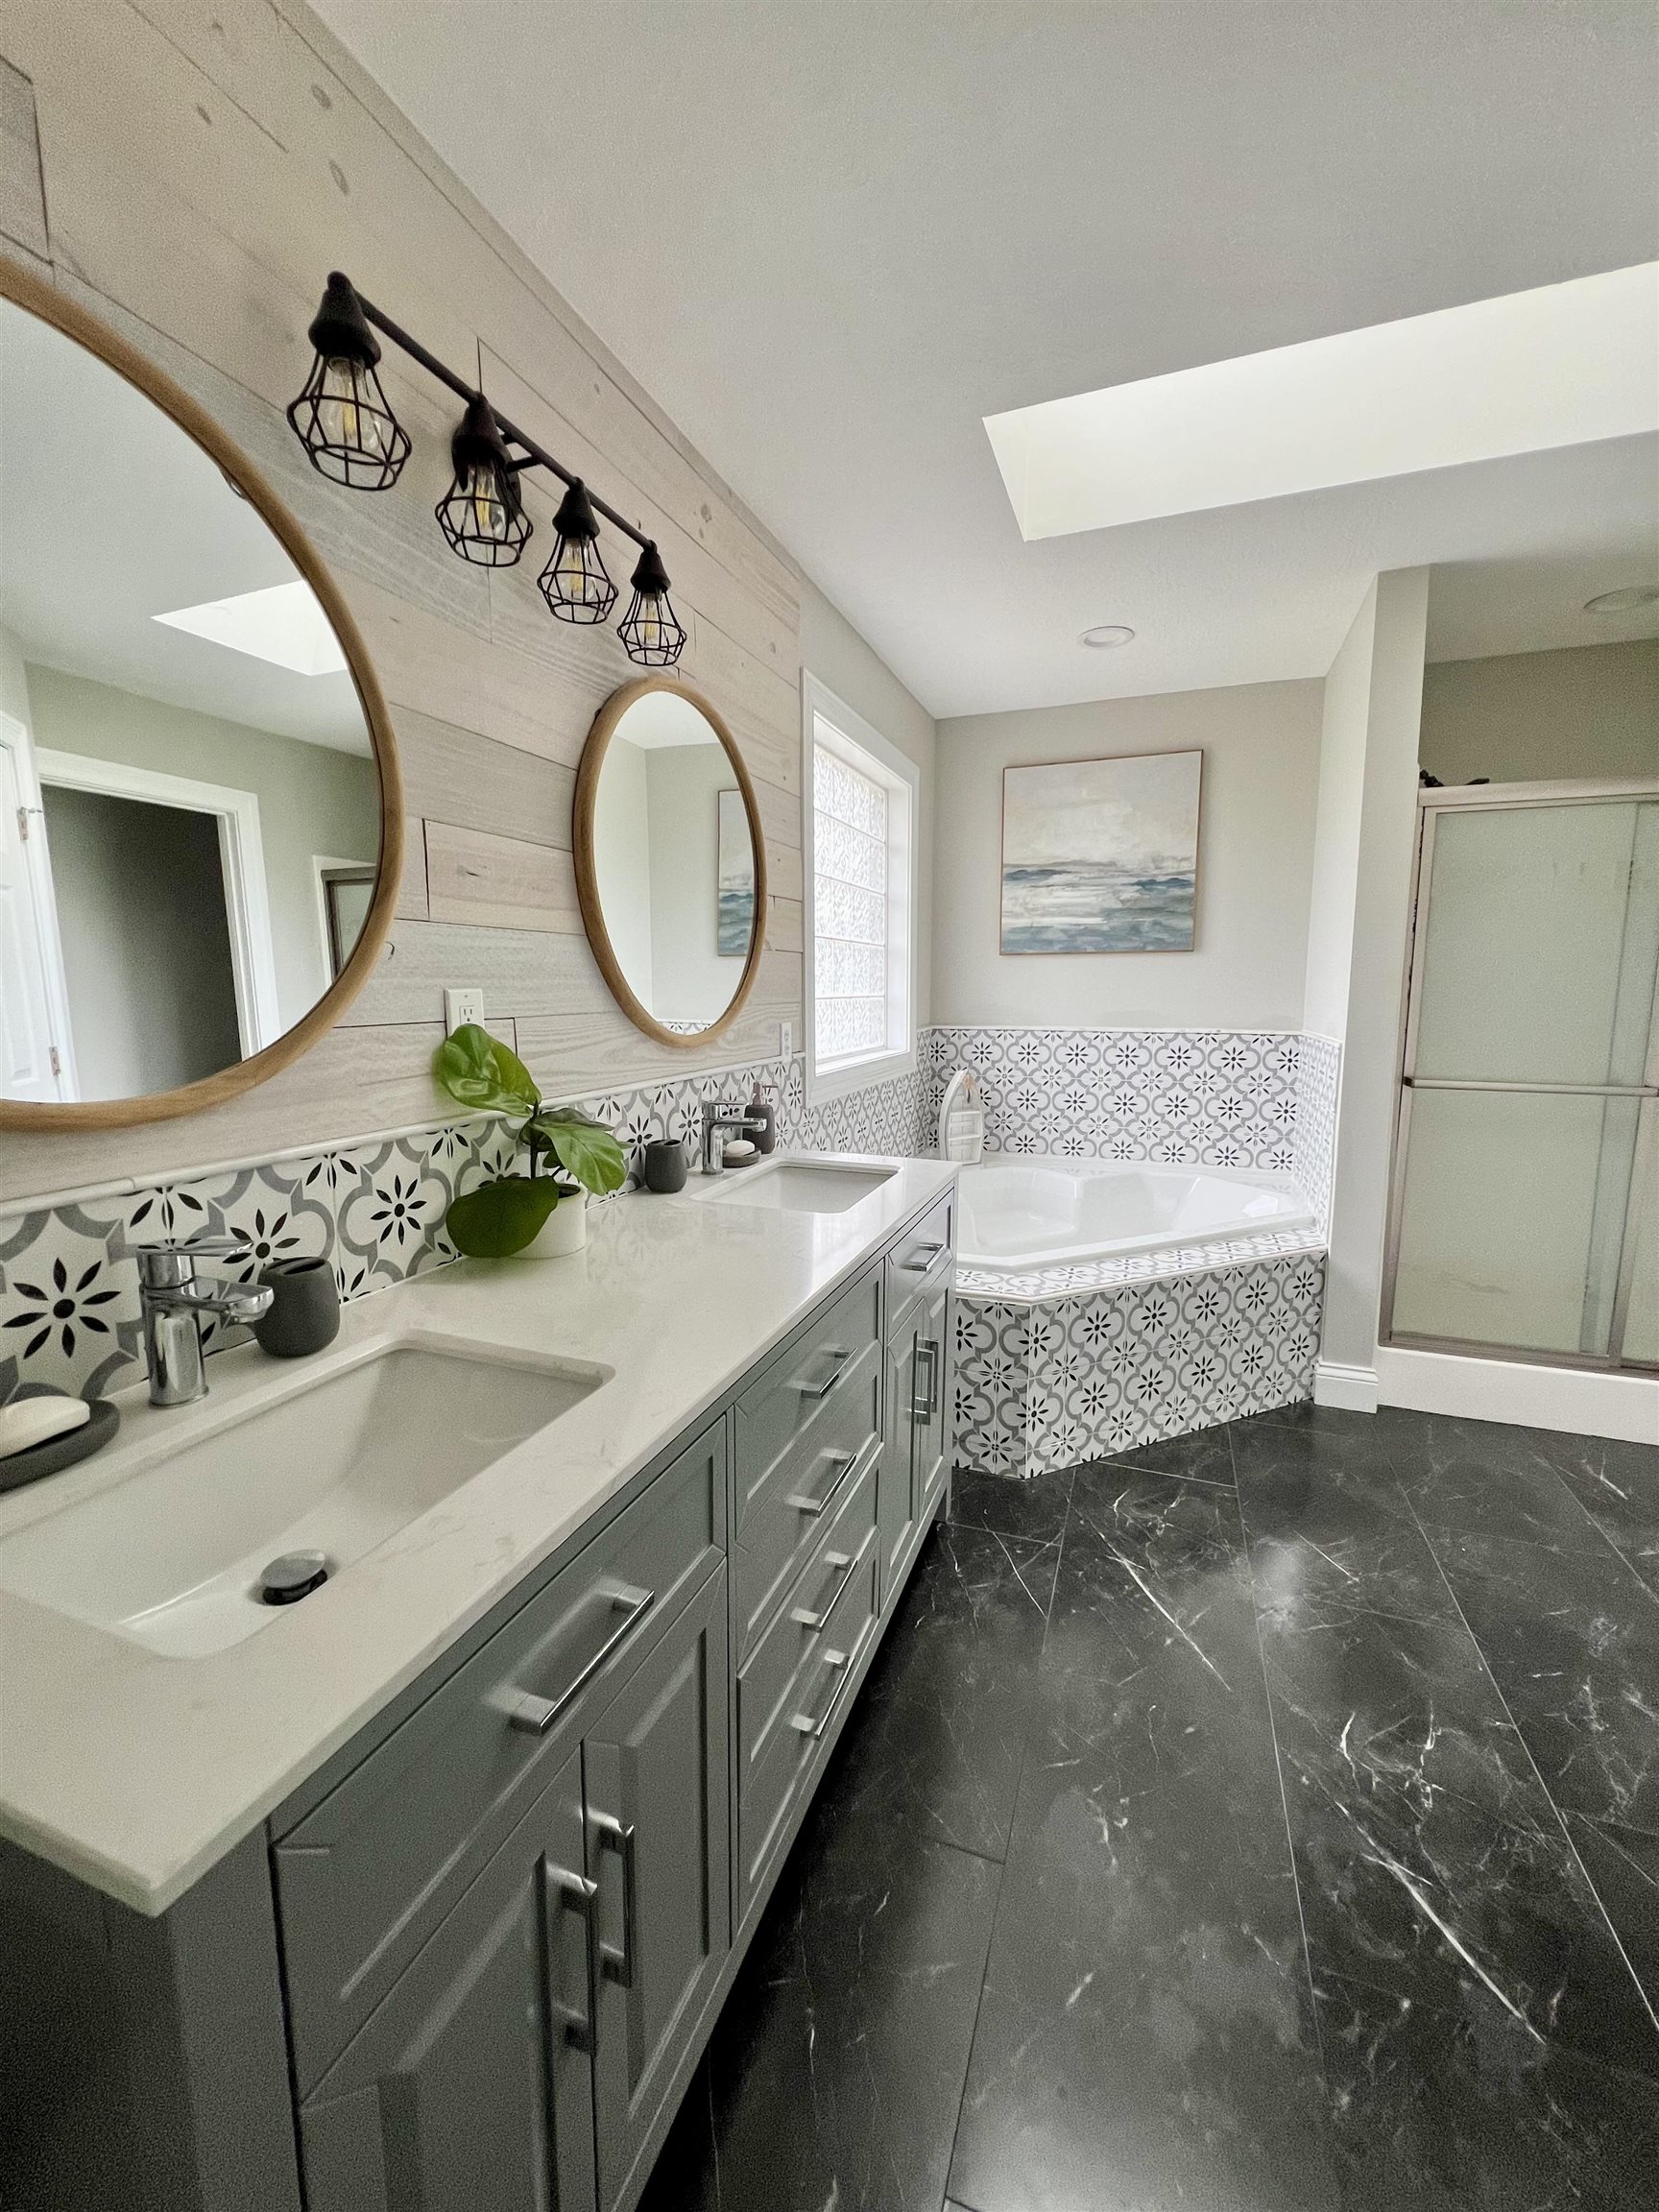 Updated with walk-in closet and shower, jetted tub, double vanity, and private water closet.